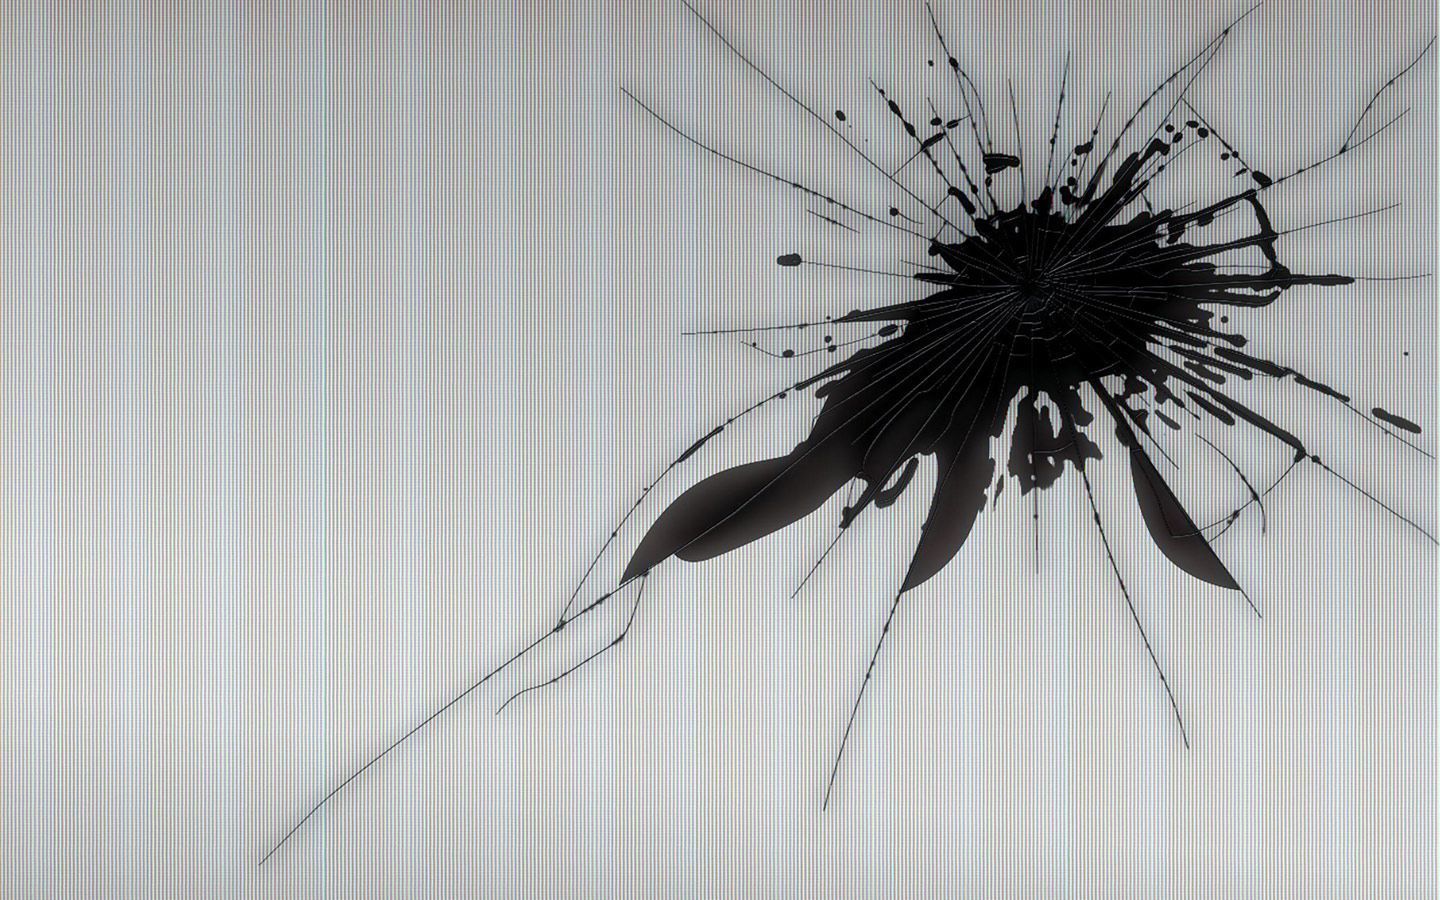 Download Cracked Lcd Screen Wallpaper | Full HD Wallpapers